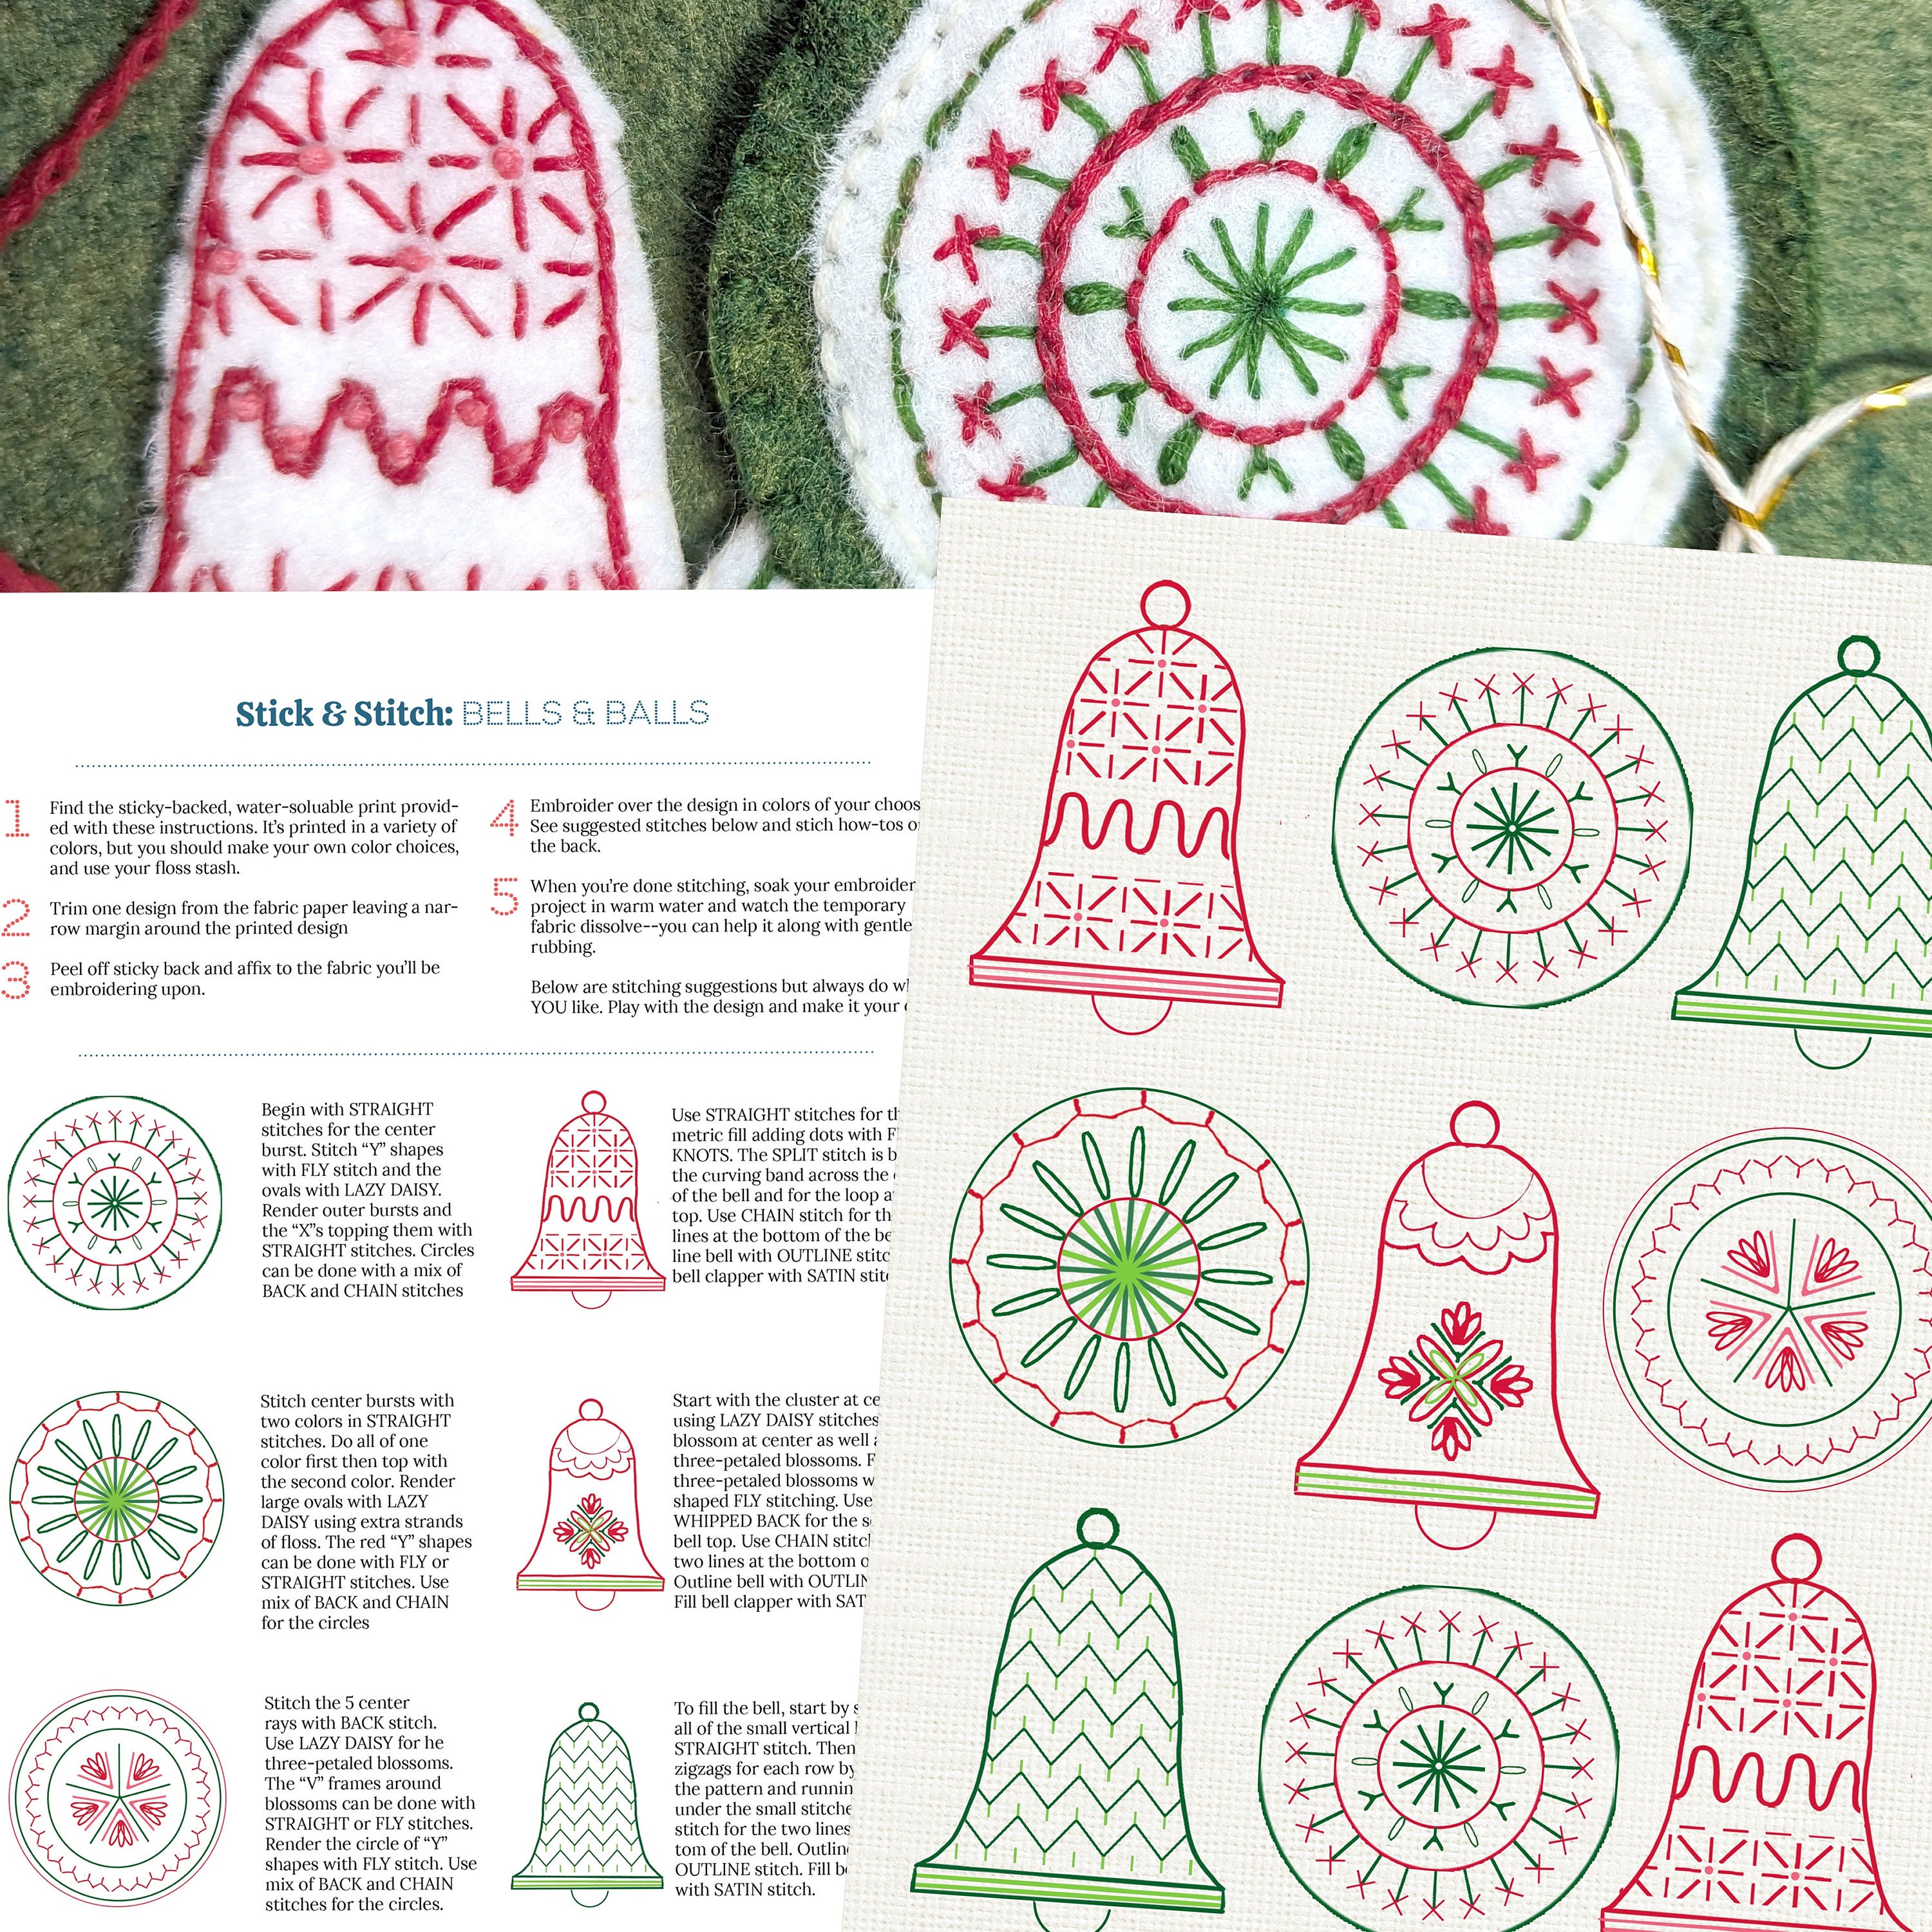 Embroidery Transfer Paper, Patterned Transfer Paper, Manual DIY